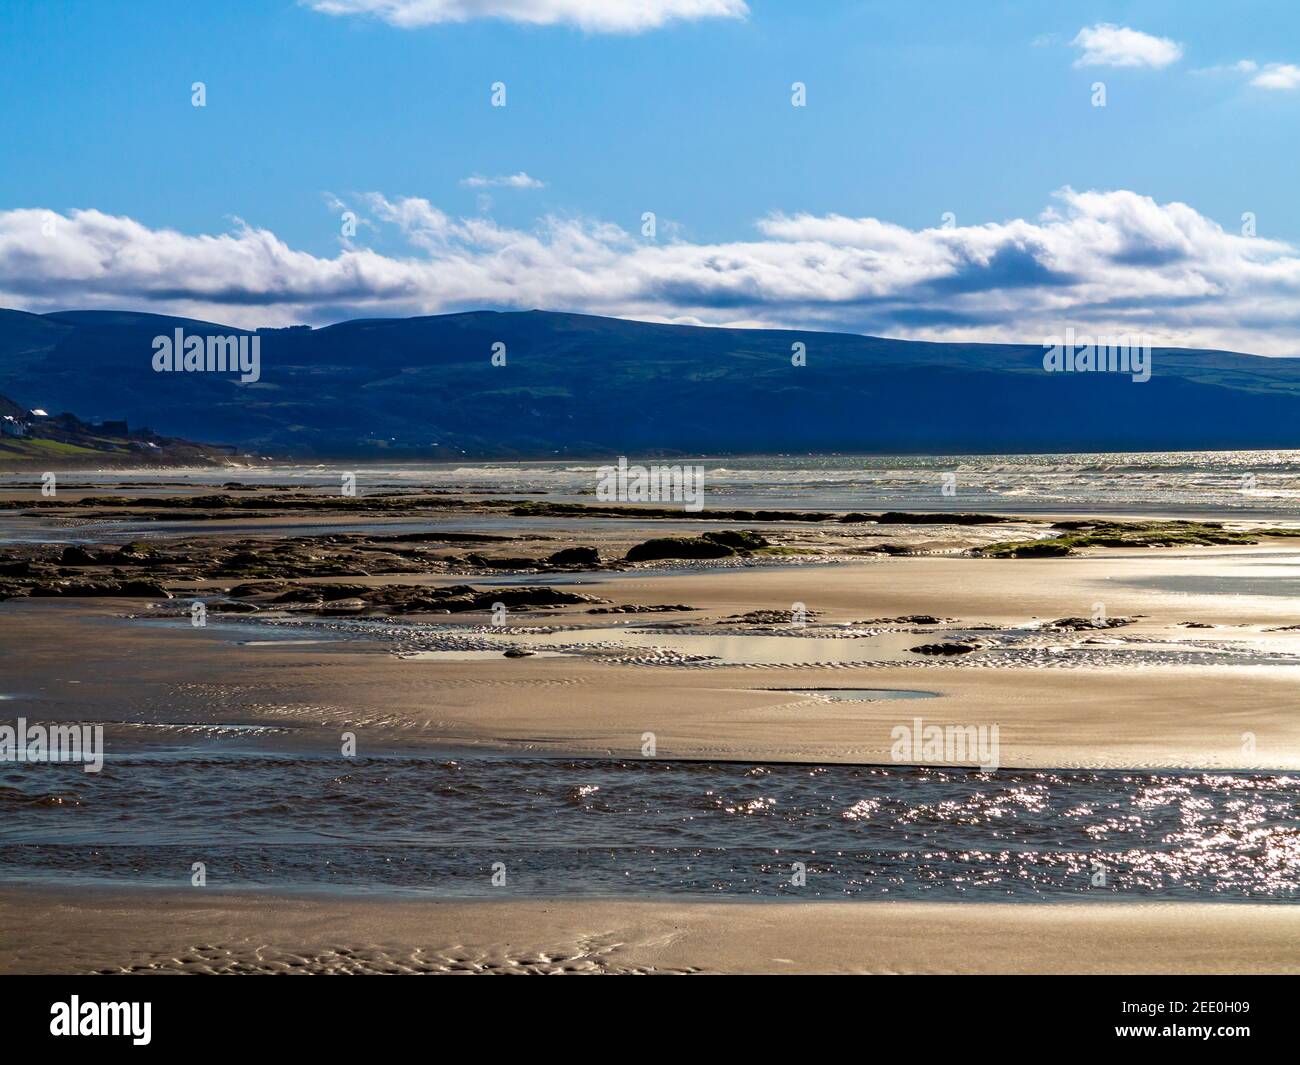 The sandy beach at Barmouth Bay or Abermaw in Gwynedd on the north west coast of Wales with the mountains of Snowdonia in tne distance. Stock Photo